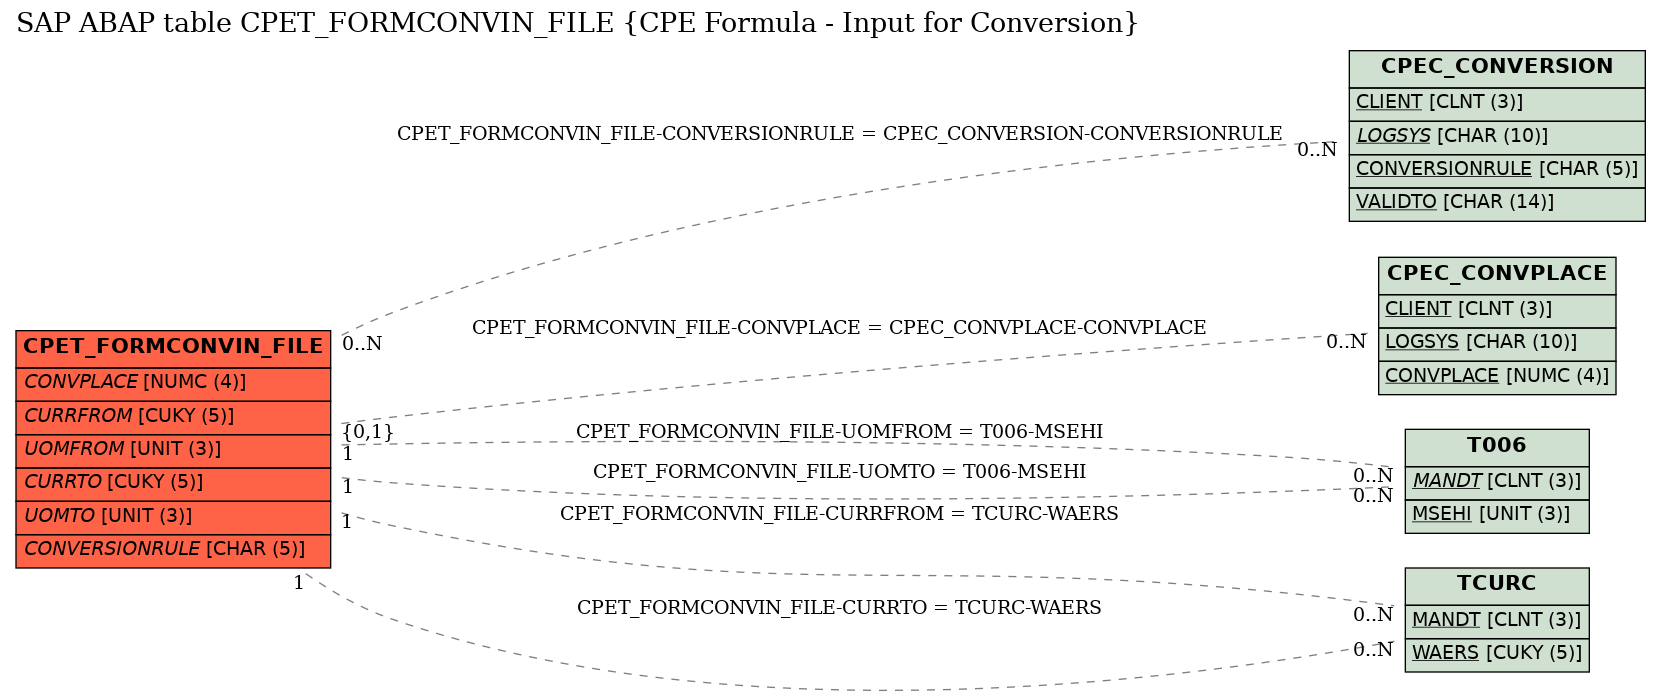 E-R Diagram for table CPET_FORMCONVIN_FILE (CPE Formula - Input for Conversion)